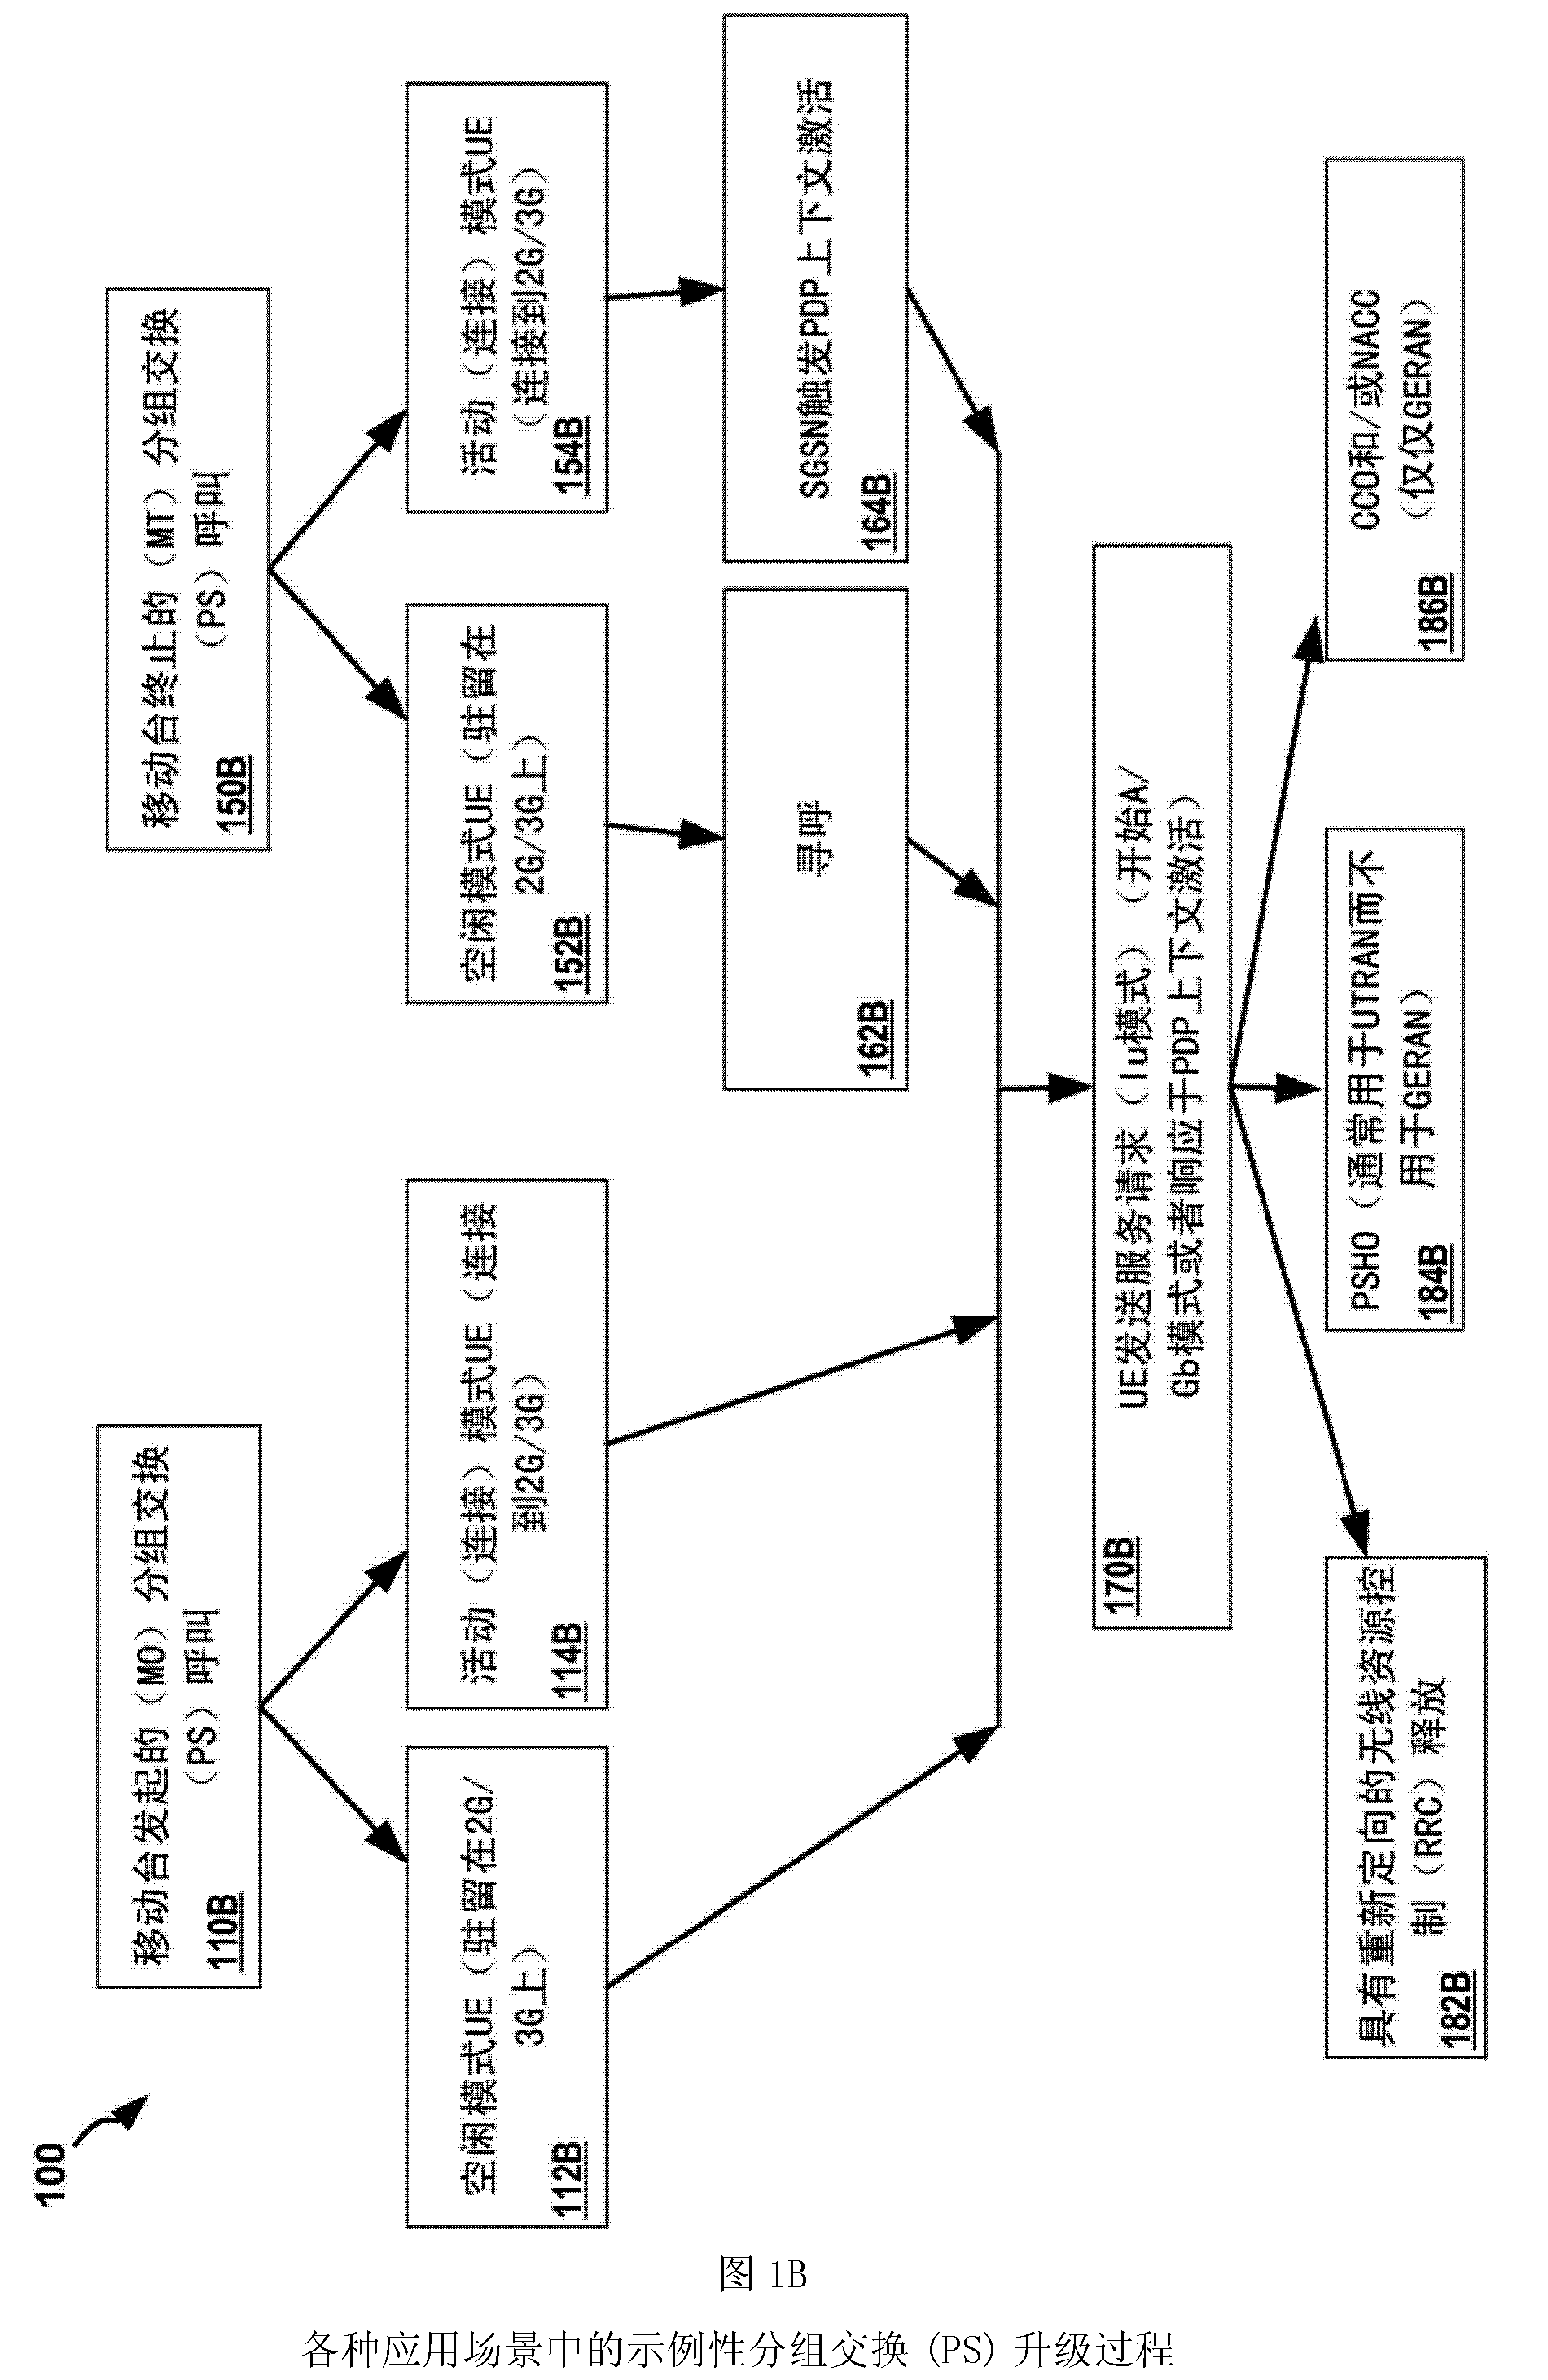 Systems and methods for inter-radio access technology (RAT) mobility